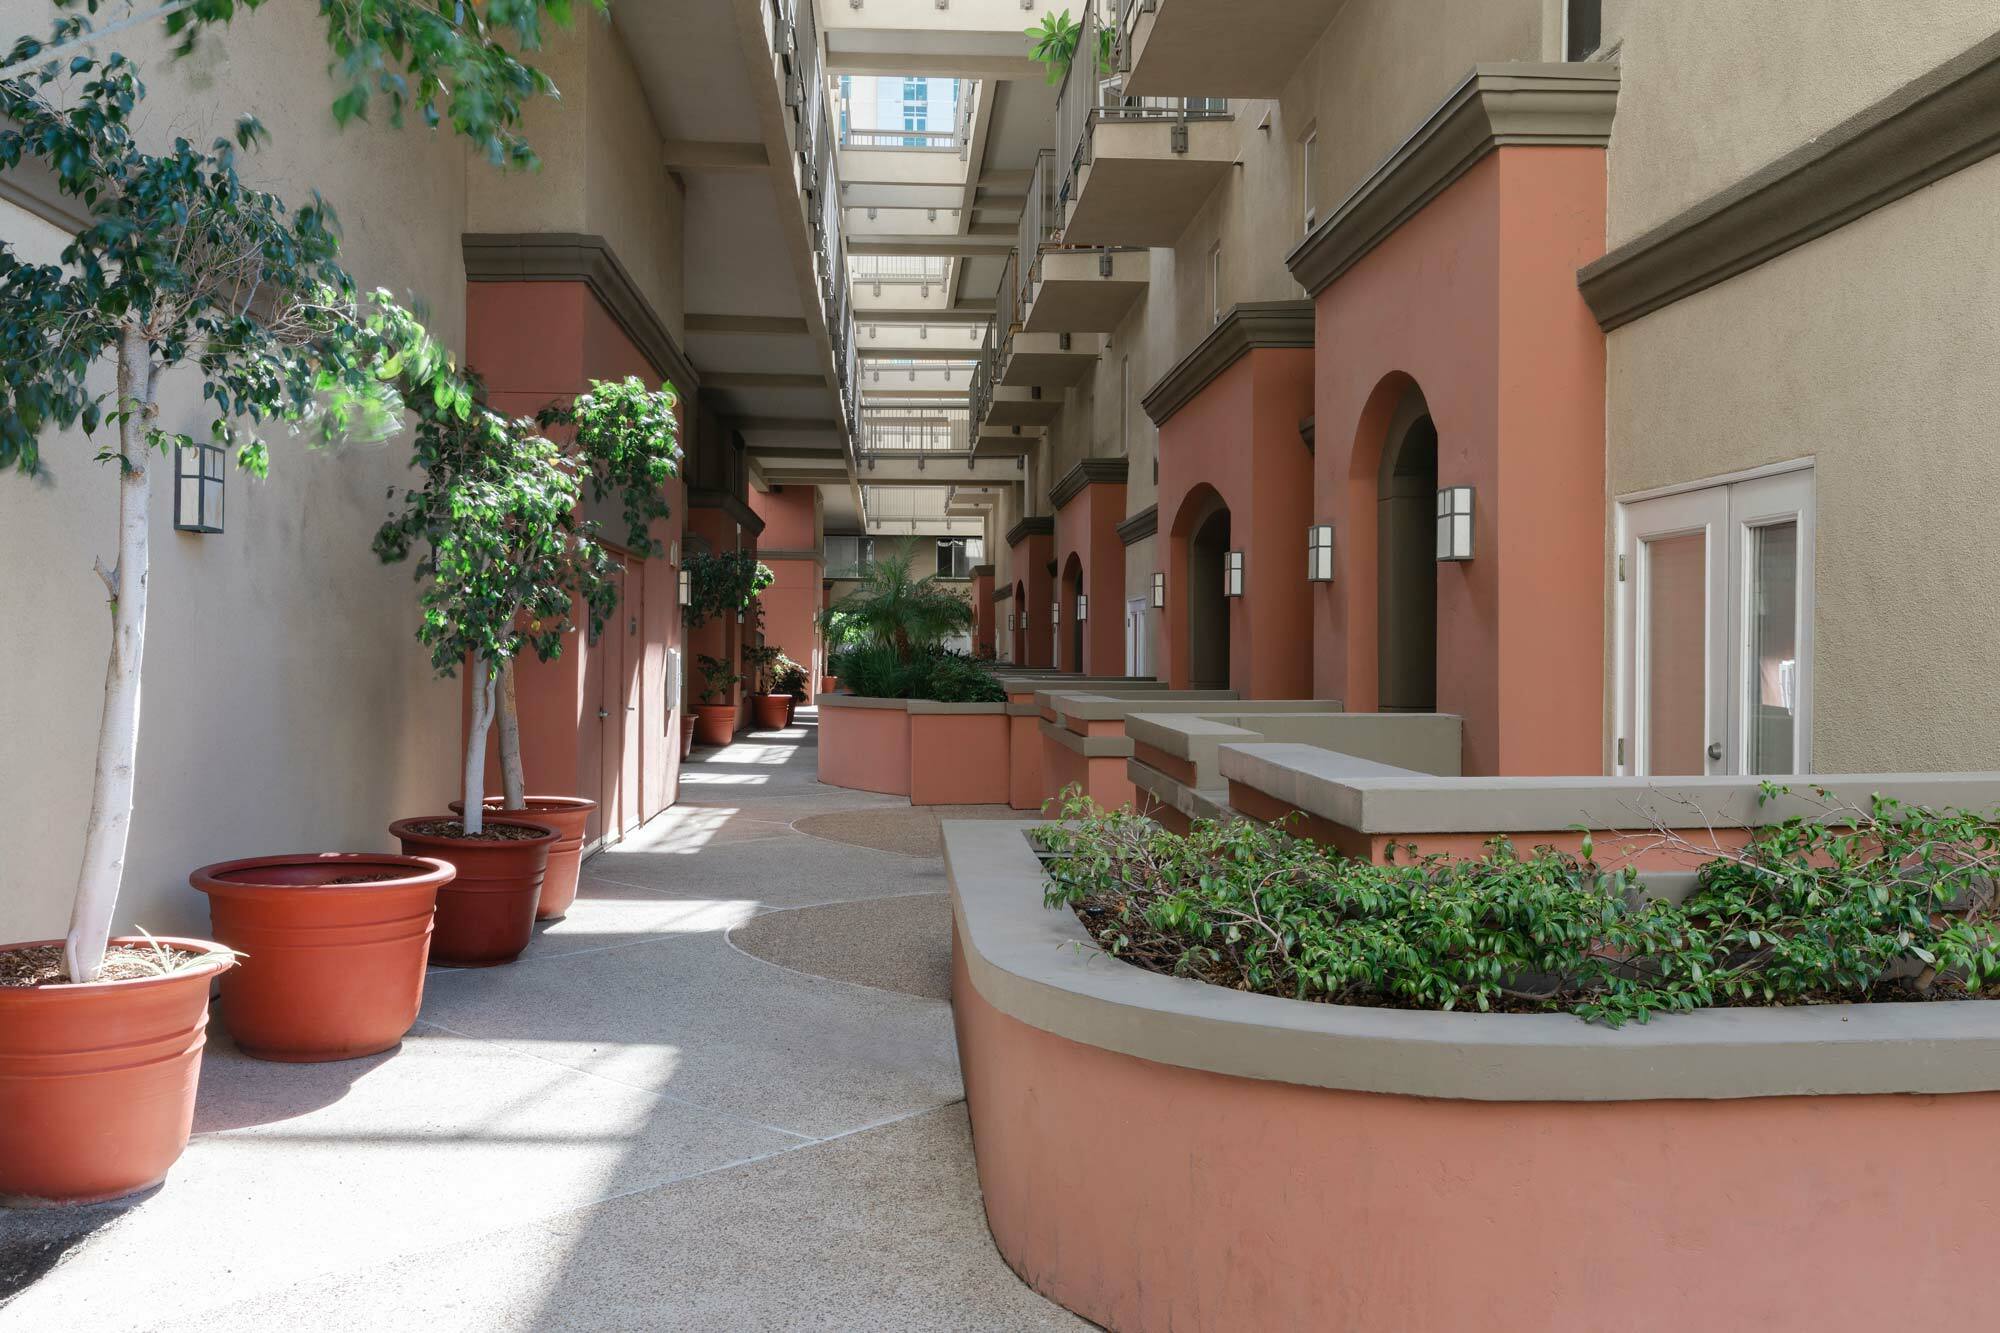 outdoor walkway lined with large potted trees